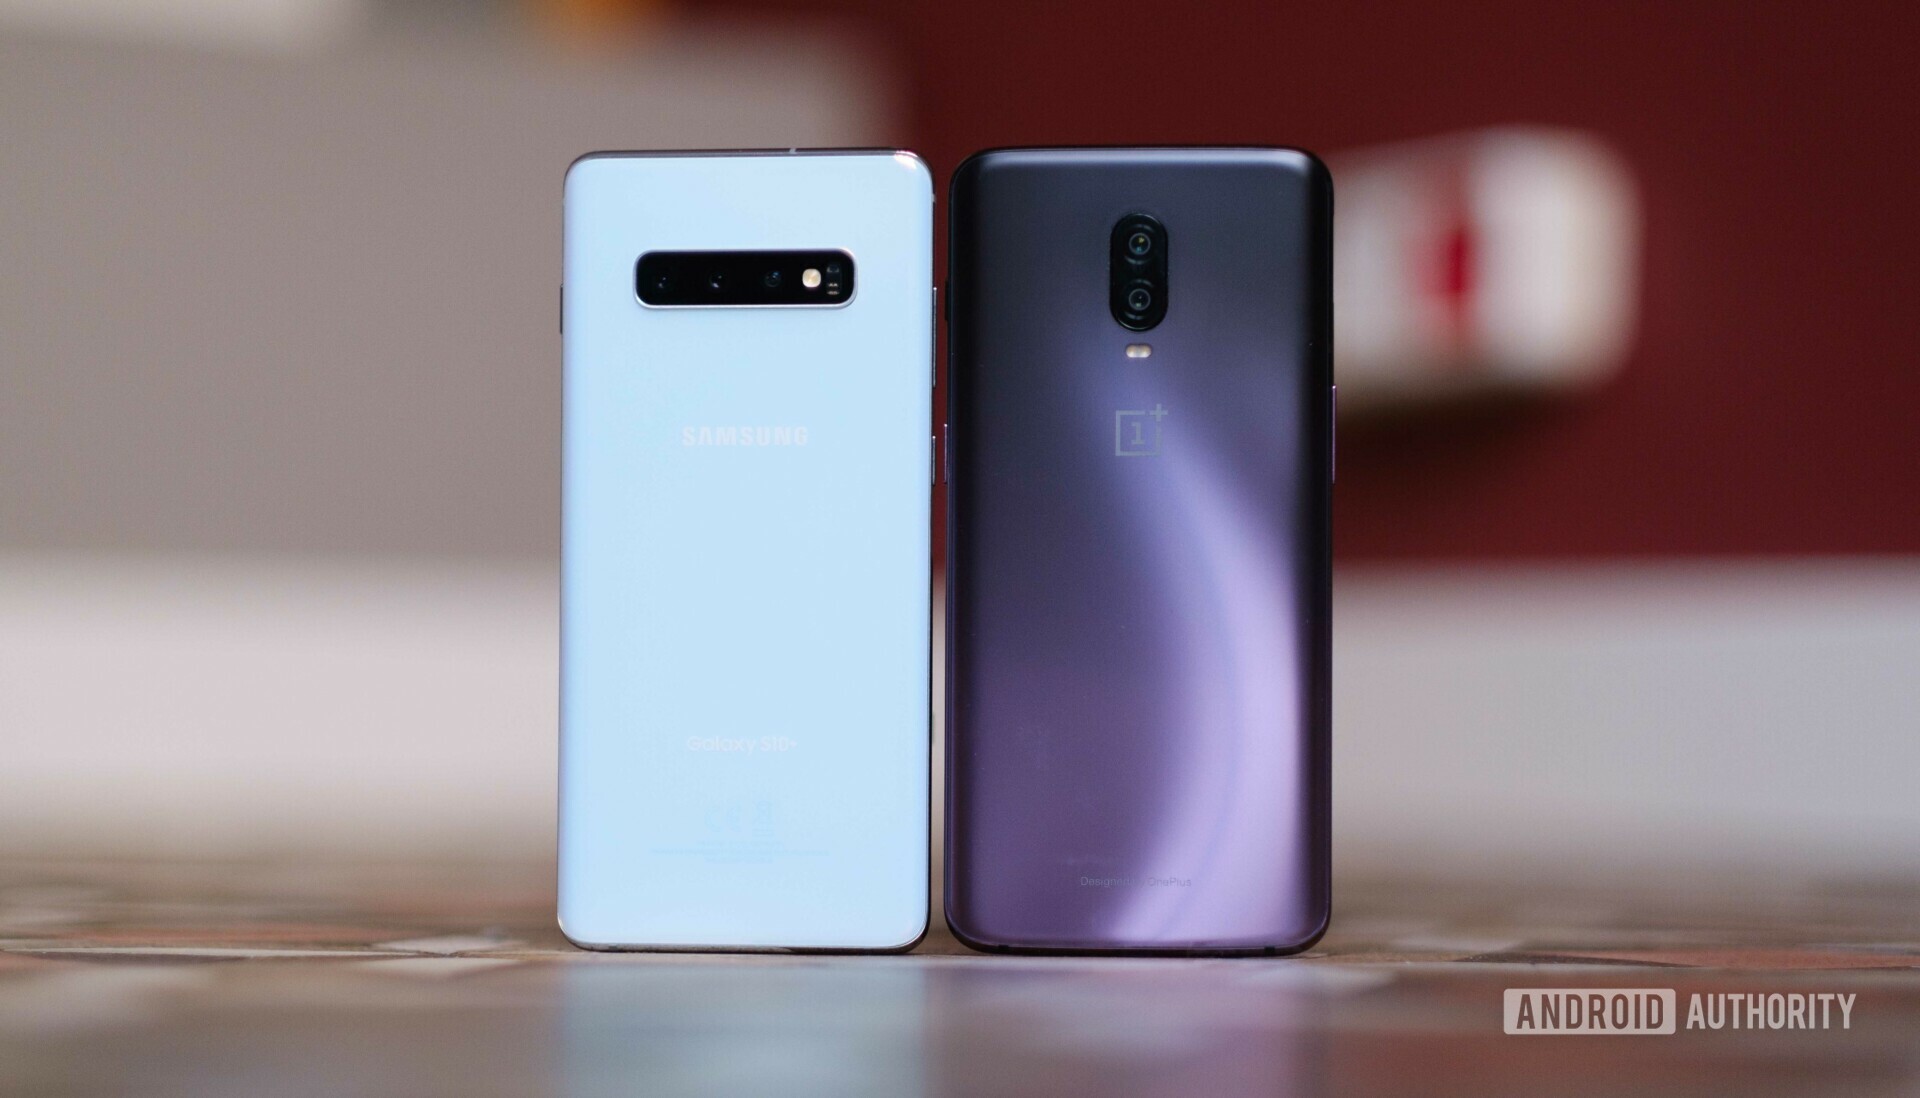 Backside of the Samsung Galaxy S10 Plus next to an OnePlus 6T 